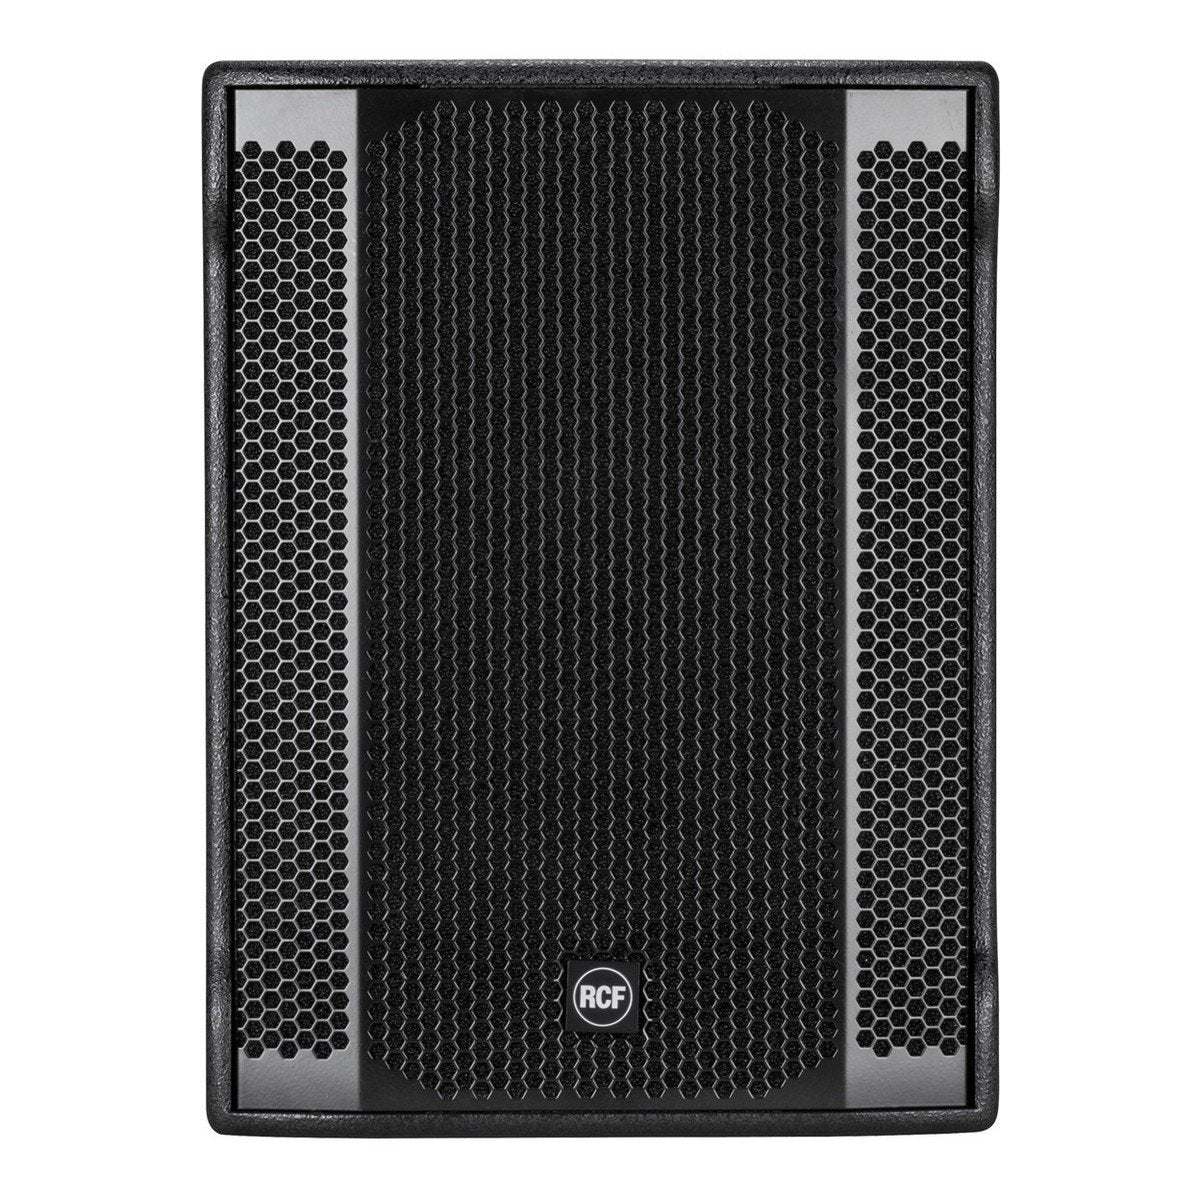 RCF Sub 905-AS II 15" Subwoofer - DY Pro Audio